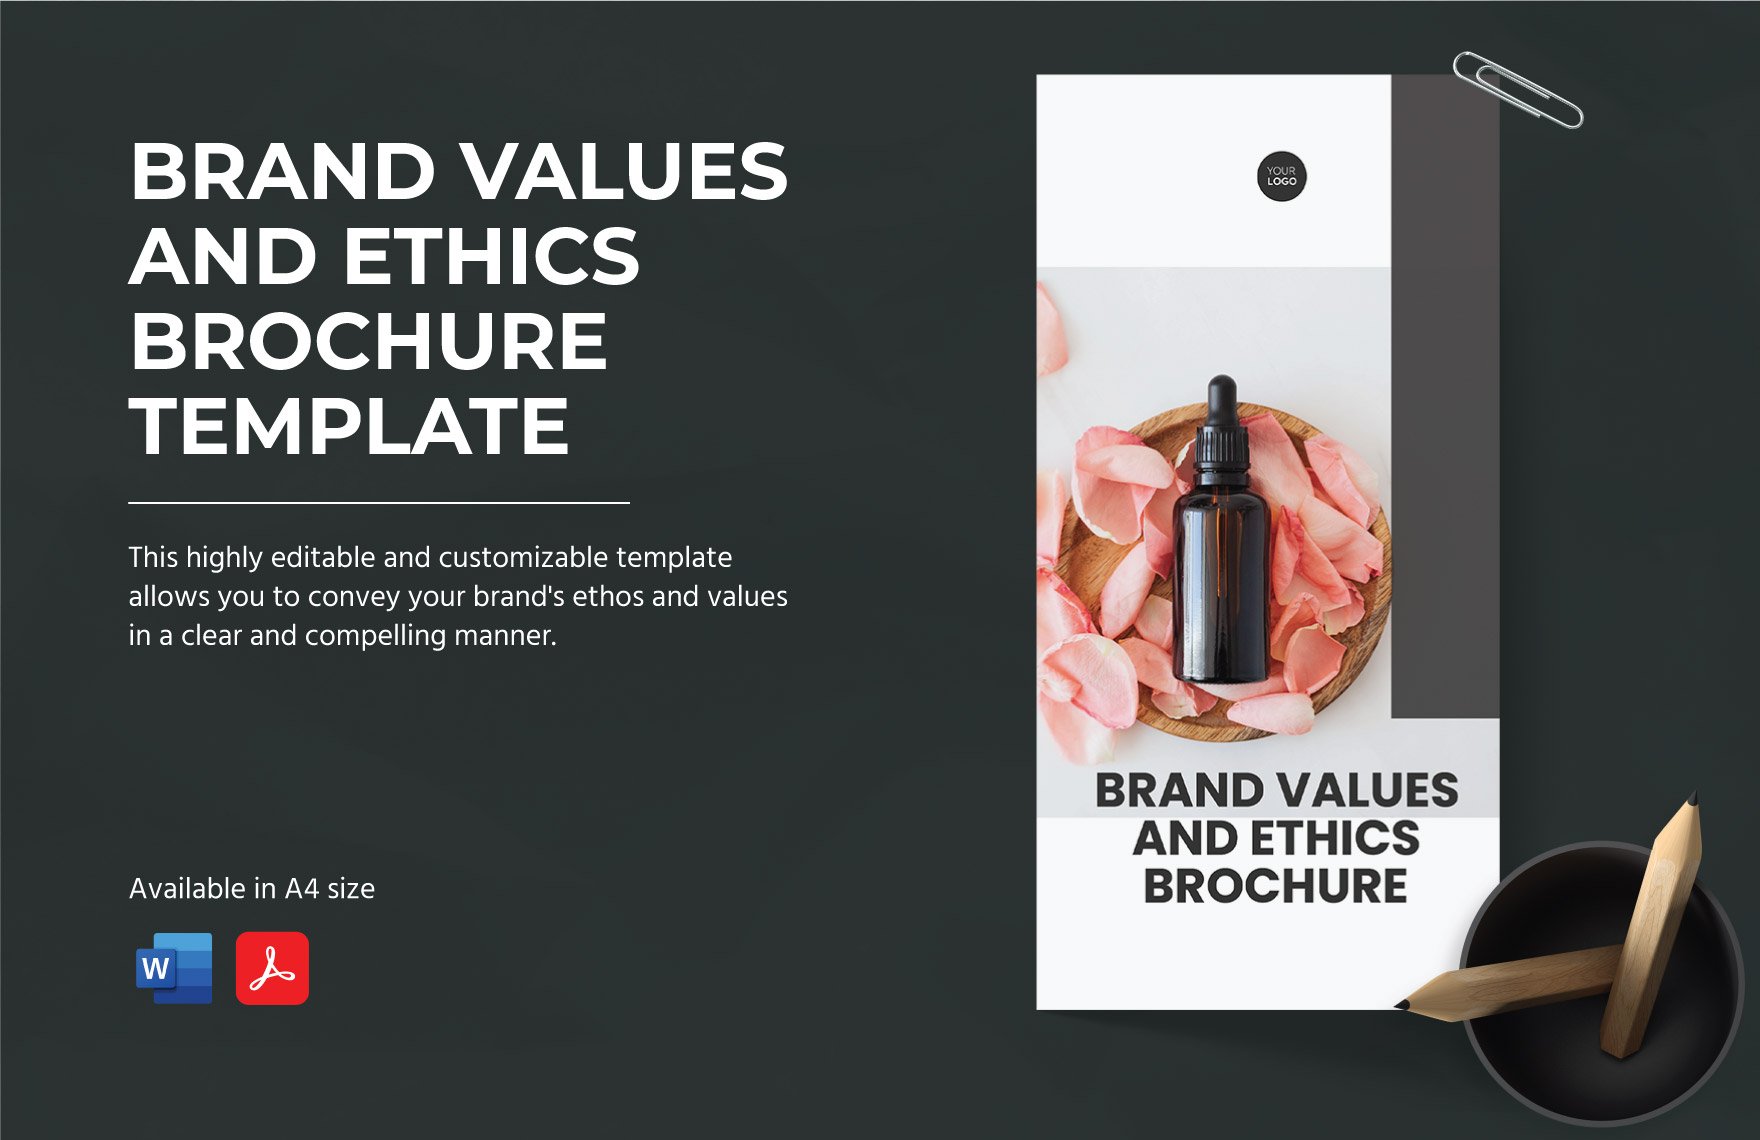 Brand Values and Ethics Brochure Template